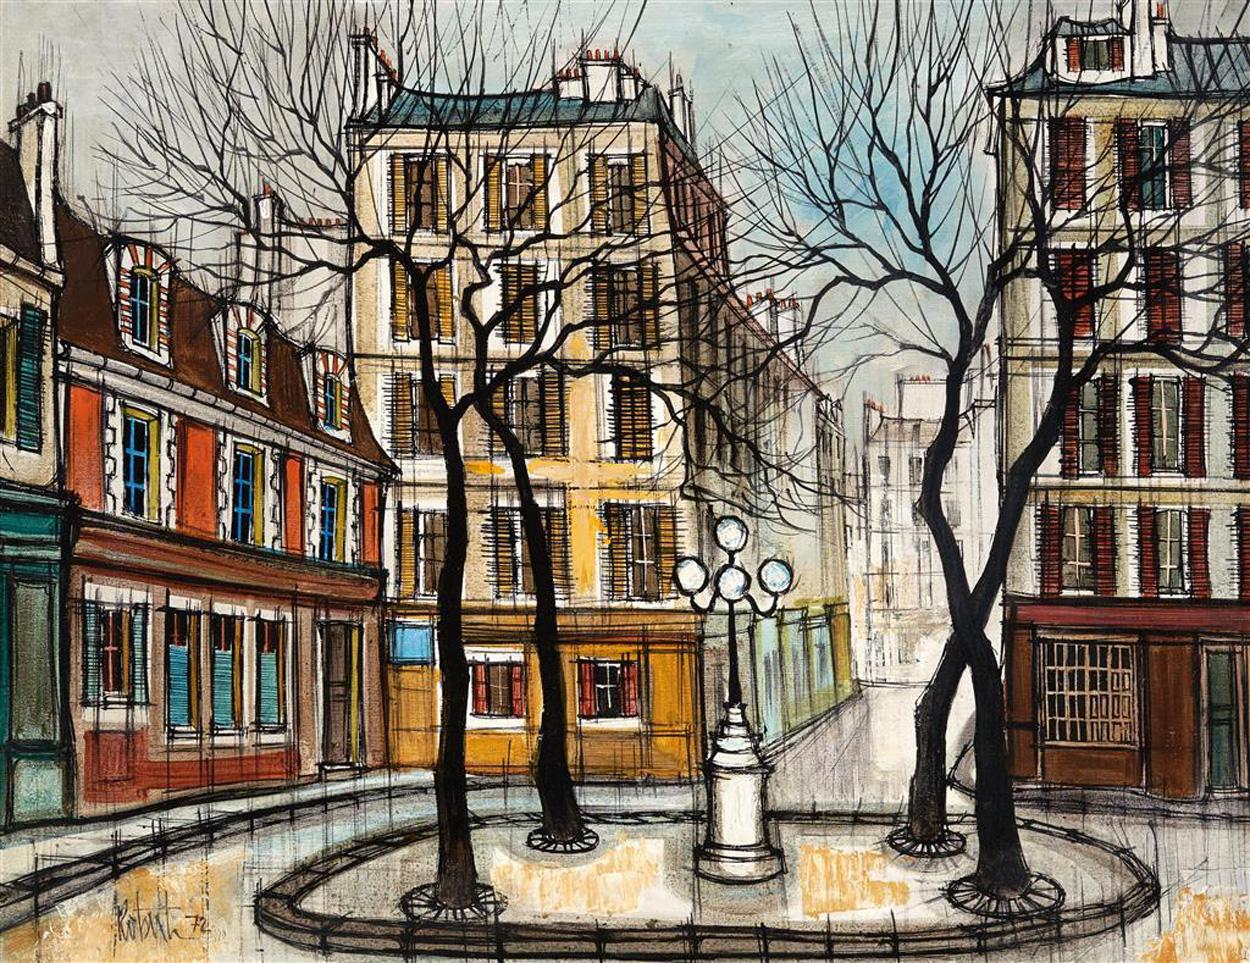 Painted Bernard Buffet 'Follower', Oil on Board, St Germaine, Signed and Dated, 1972 For Sale